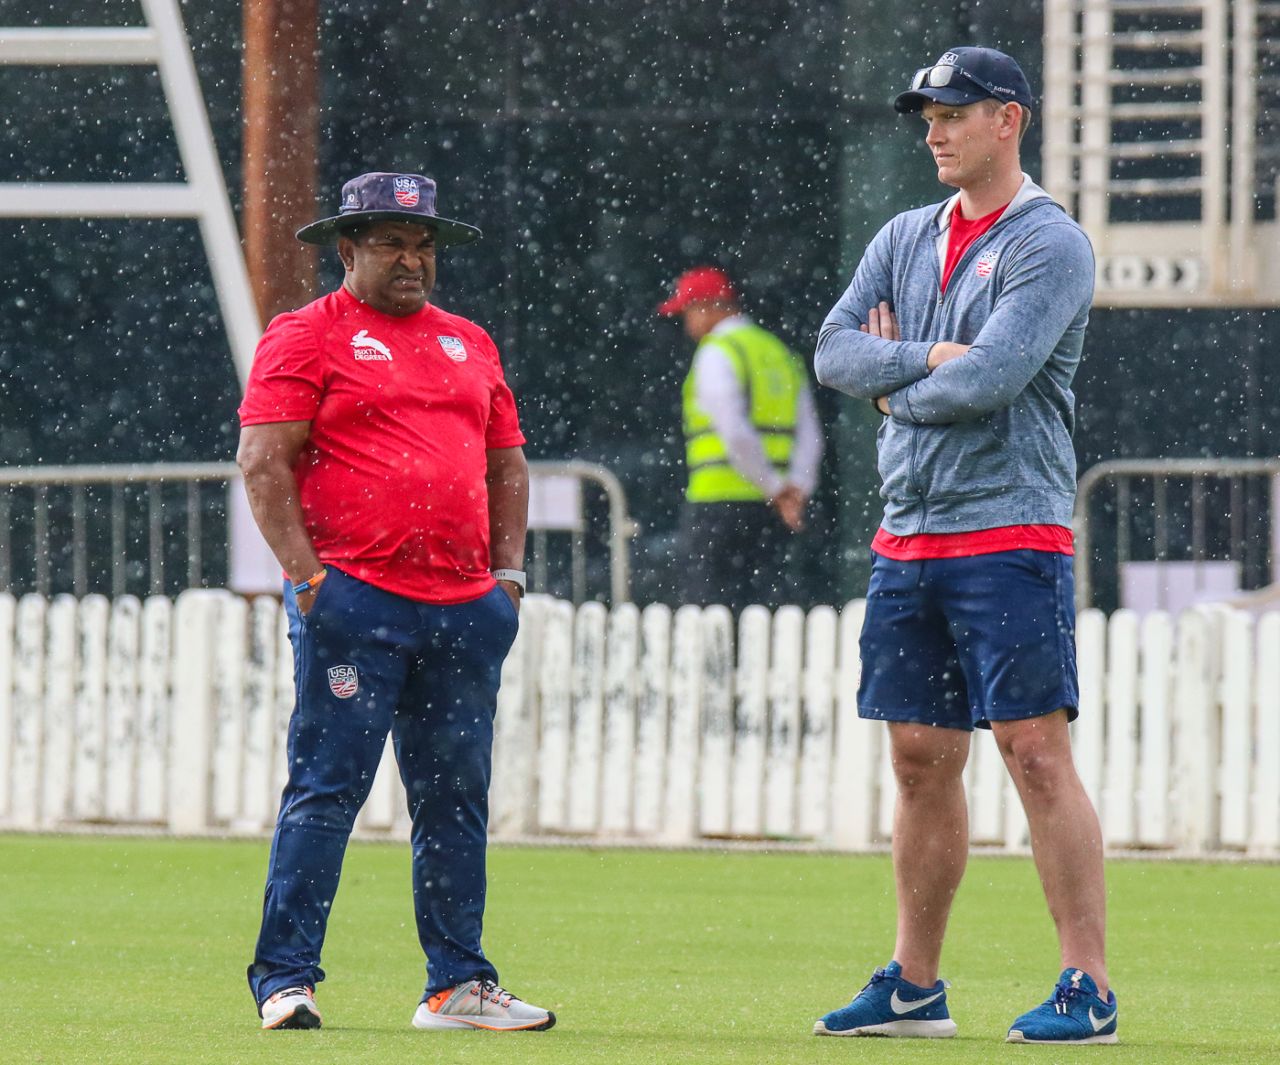 USA coach Pubudu Dassanayake stands frustrated in the rain as USA's maiden T20I ended with no result, UAE v USA, 1st T20I, Dubai, March 15, 2019